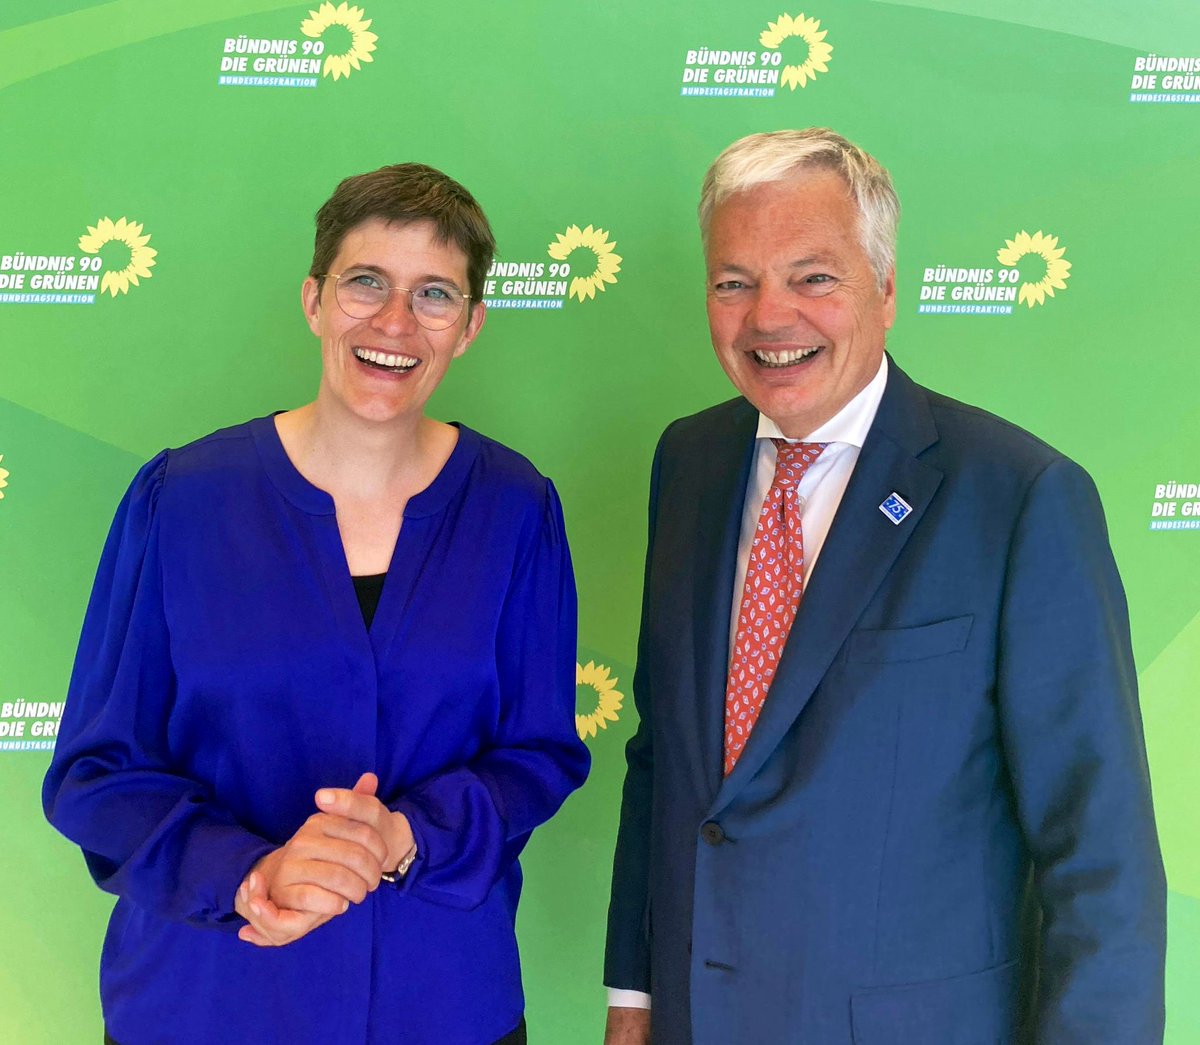 It was a pleasure to meet again with @AnnaLuehrmann, 🇩🇪 Deputy Minister for #European Affairs, today in #Berlin to discuss about my candidacy for the post of Secretary General of @coe. Thank you for having me! J'ai eu le plaisir de rencontrer à nouveau ce mardi à #Berlin